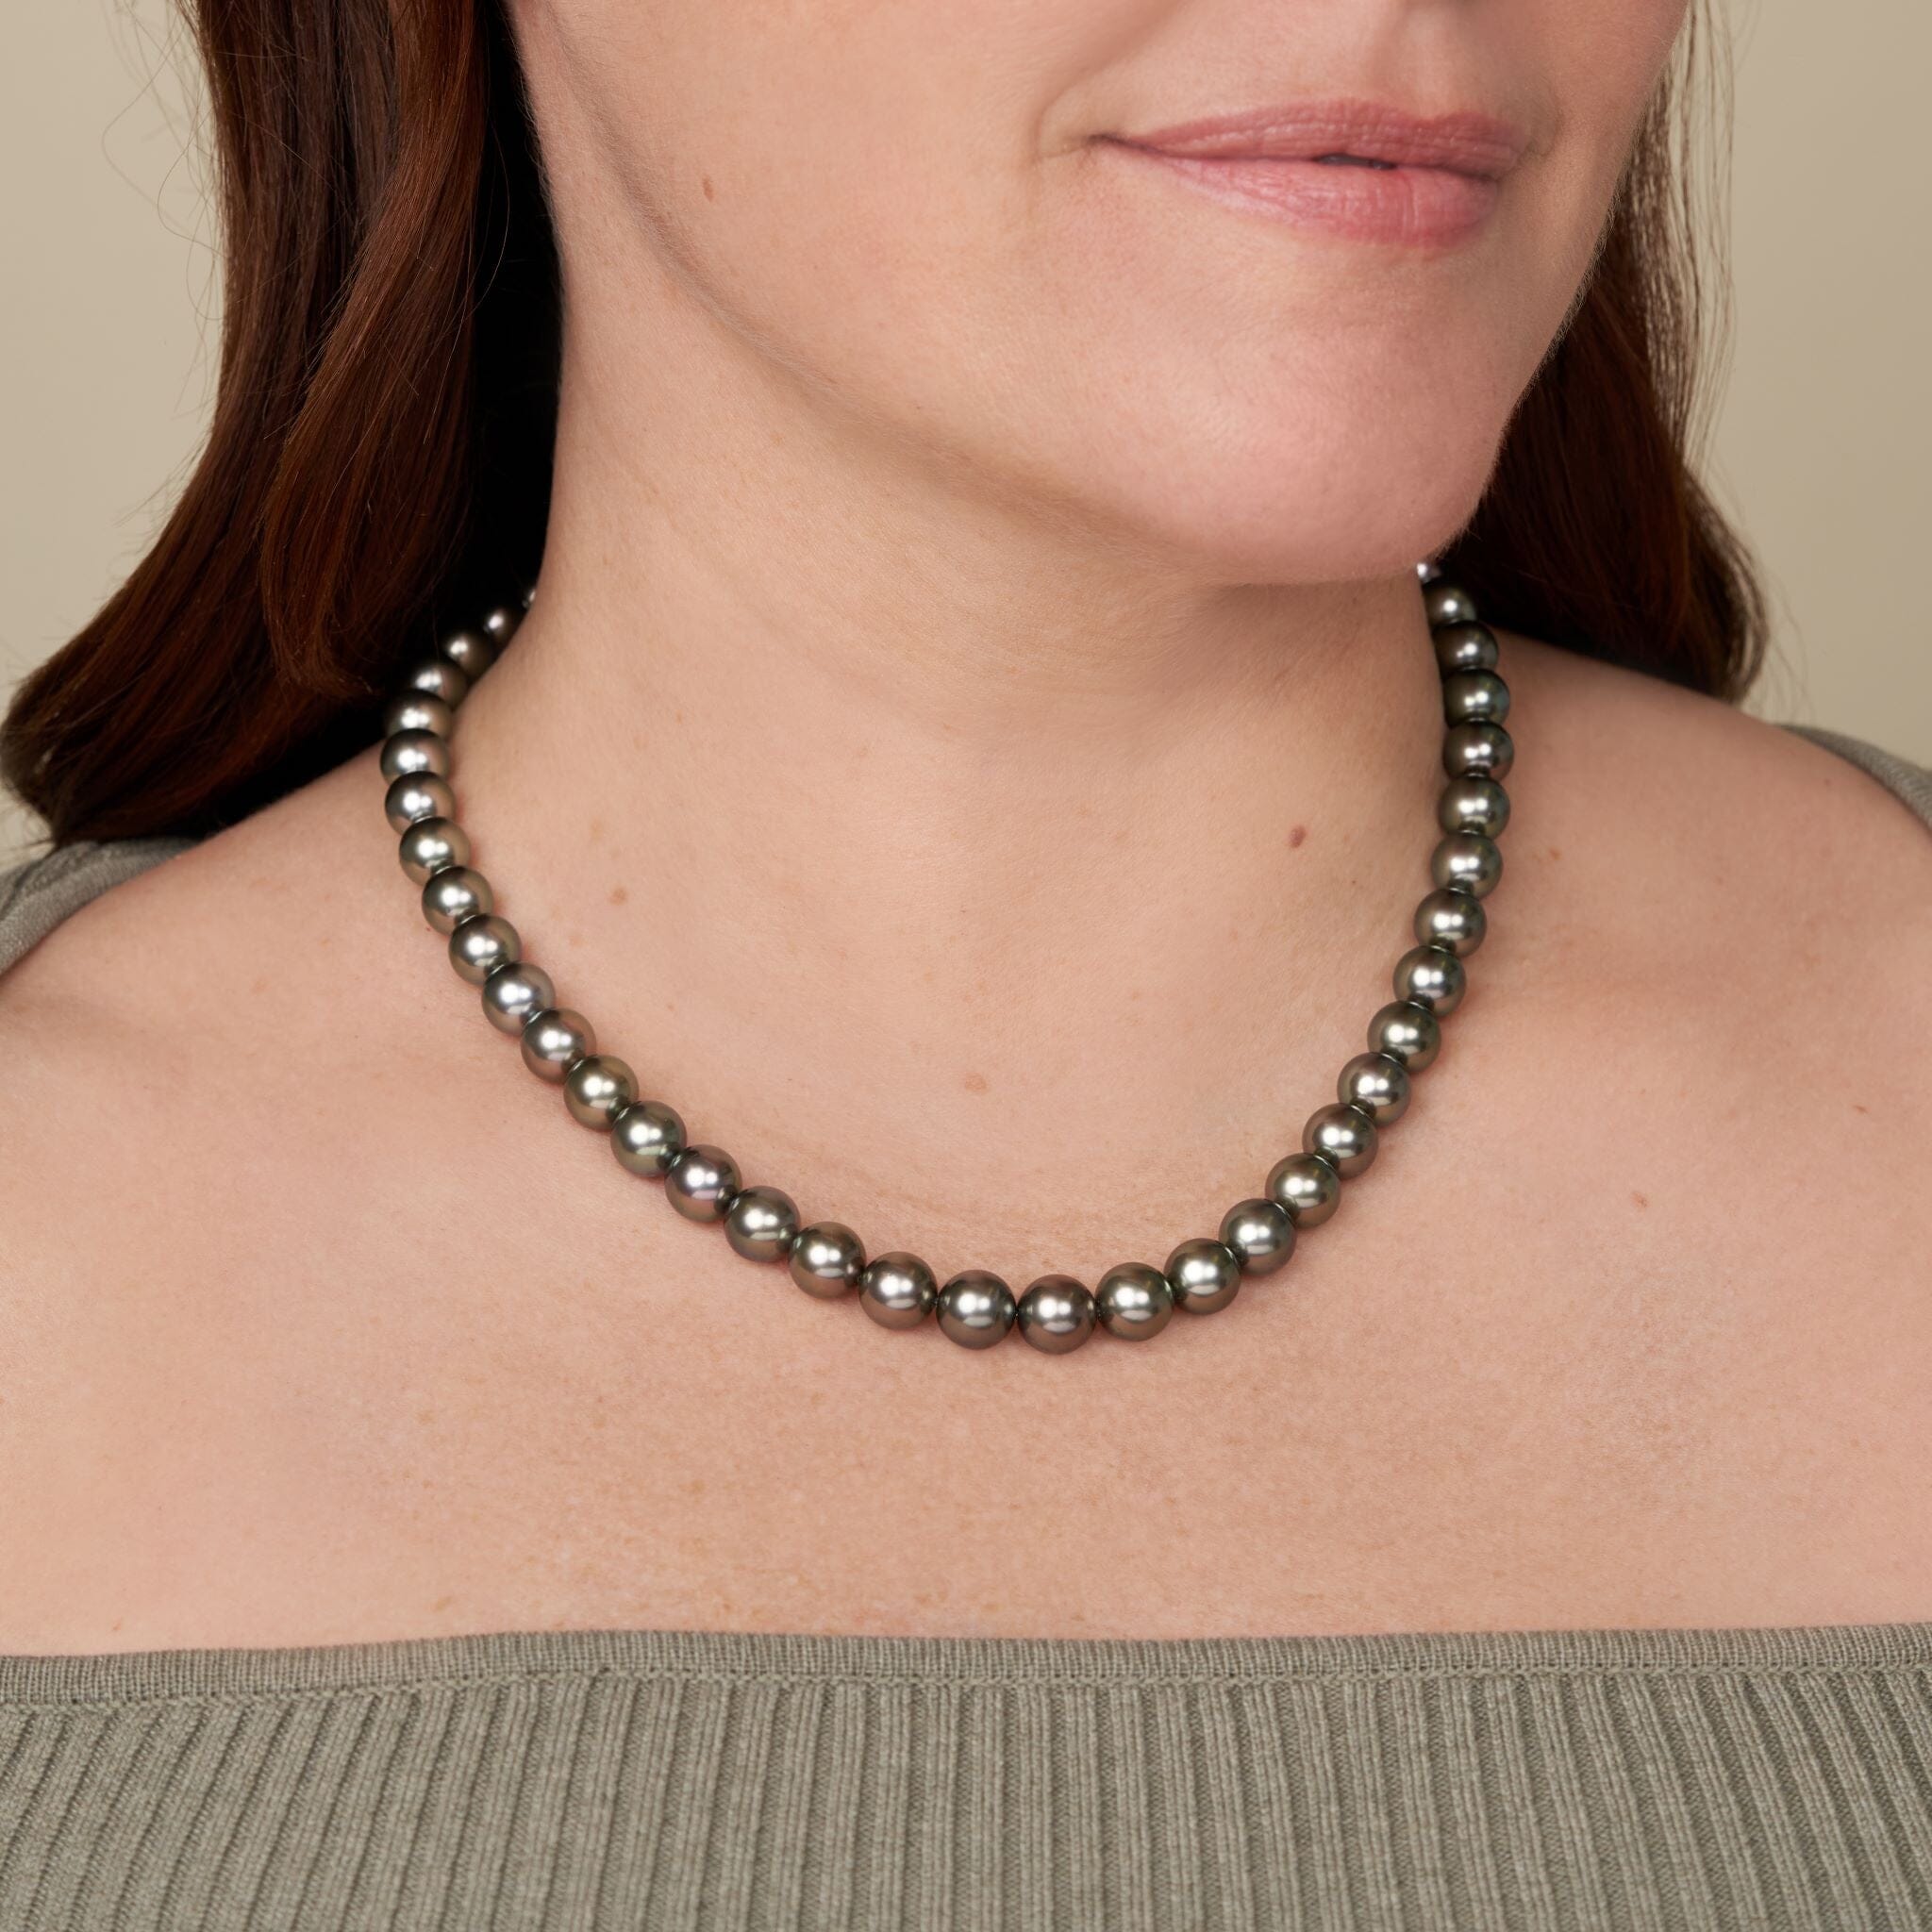 18-inch 9.0-9.9 mm AA+/AAA Round Tahitian Pearl Necklace